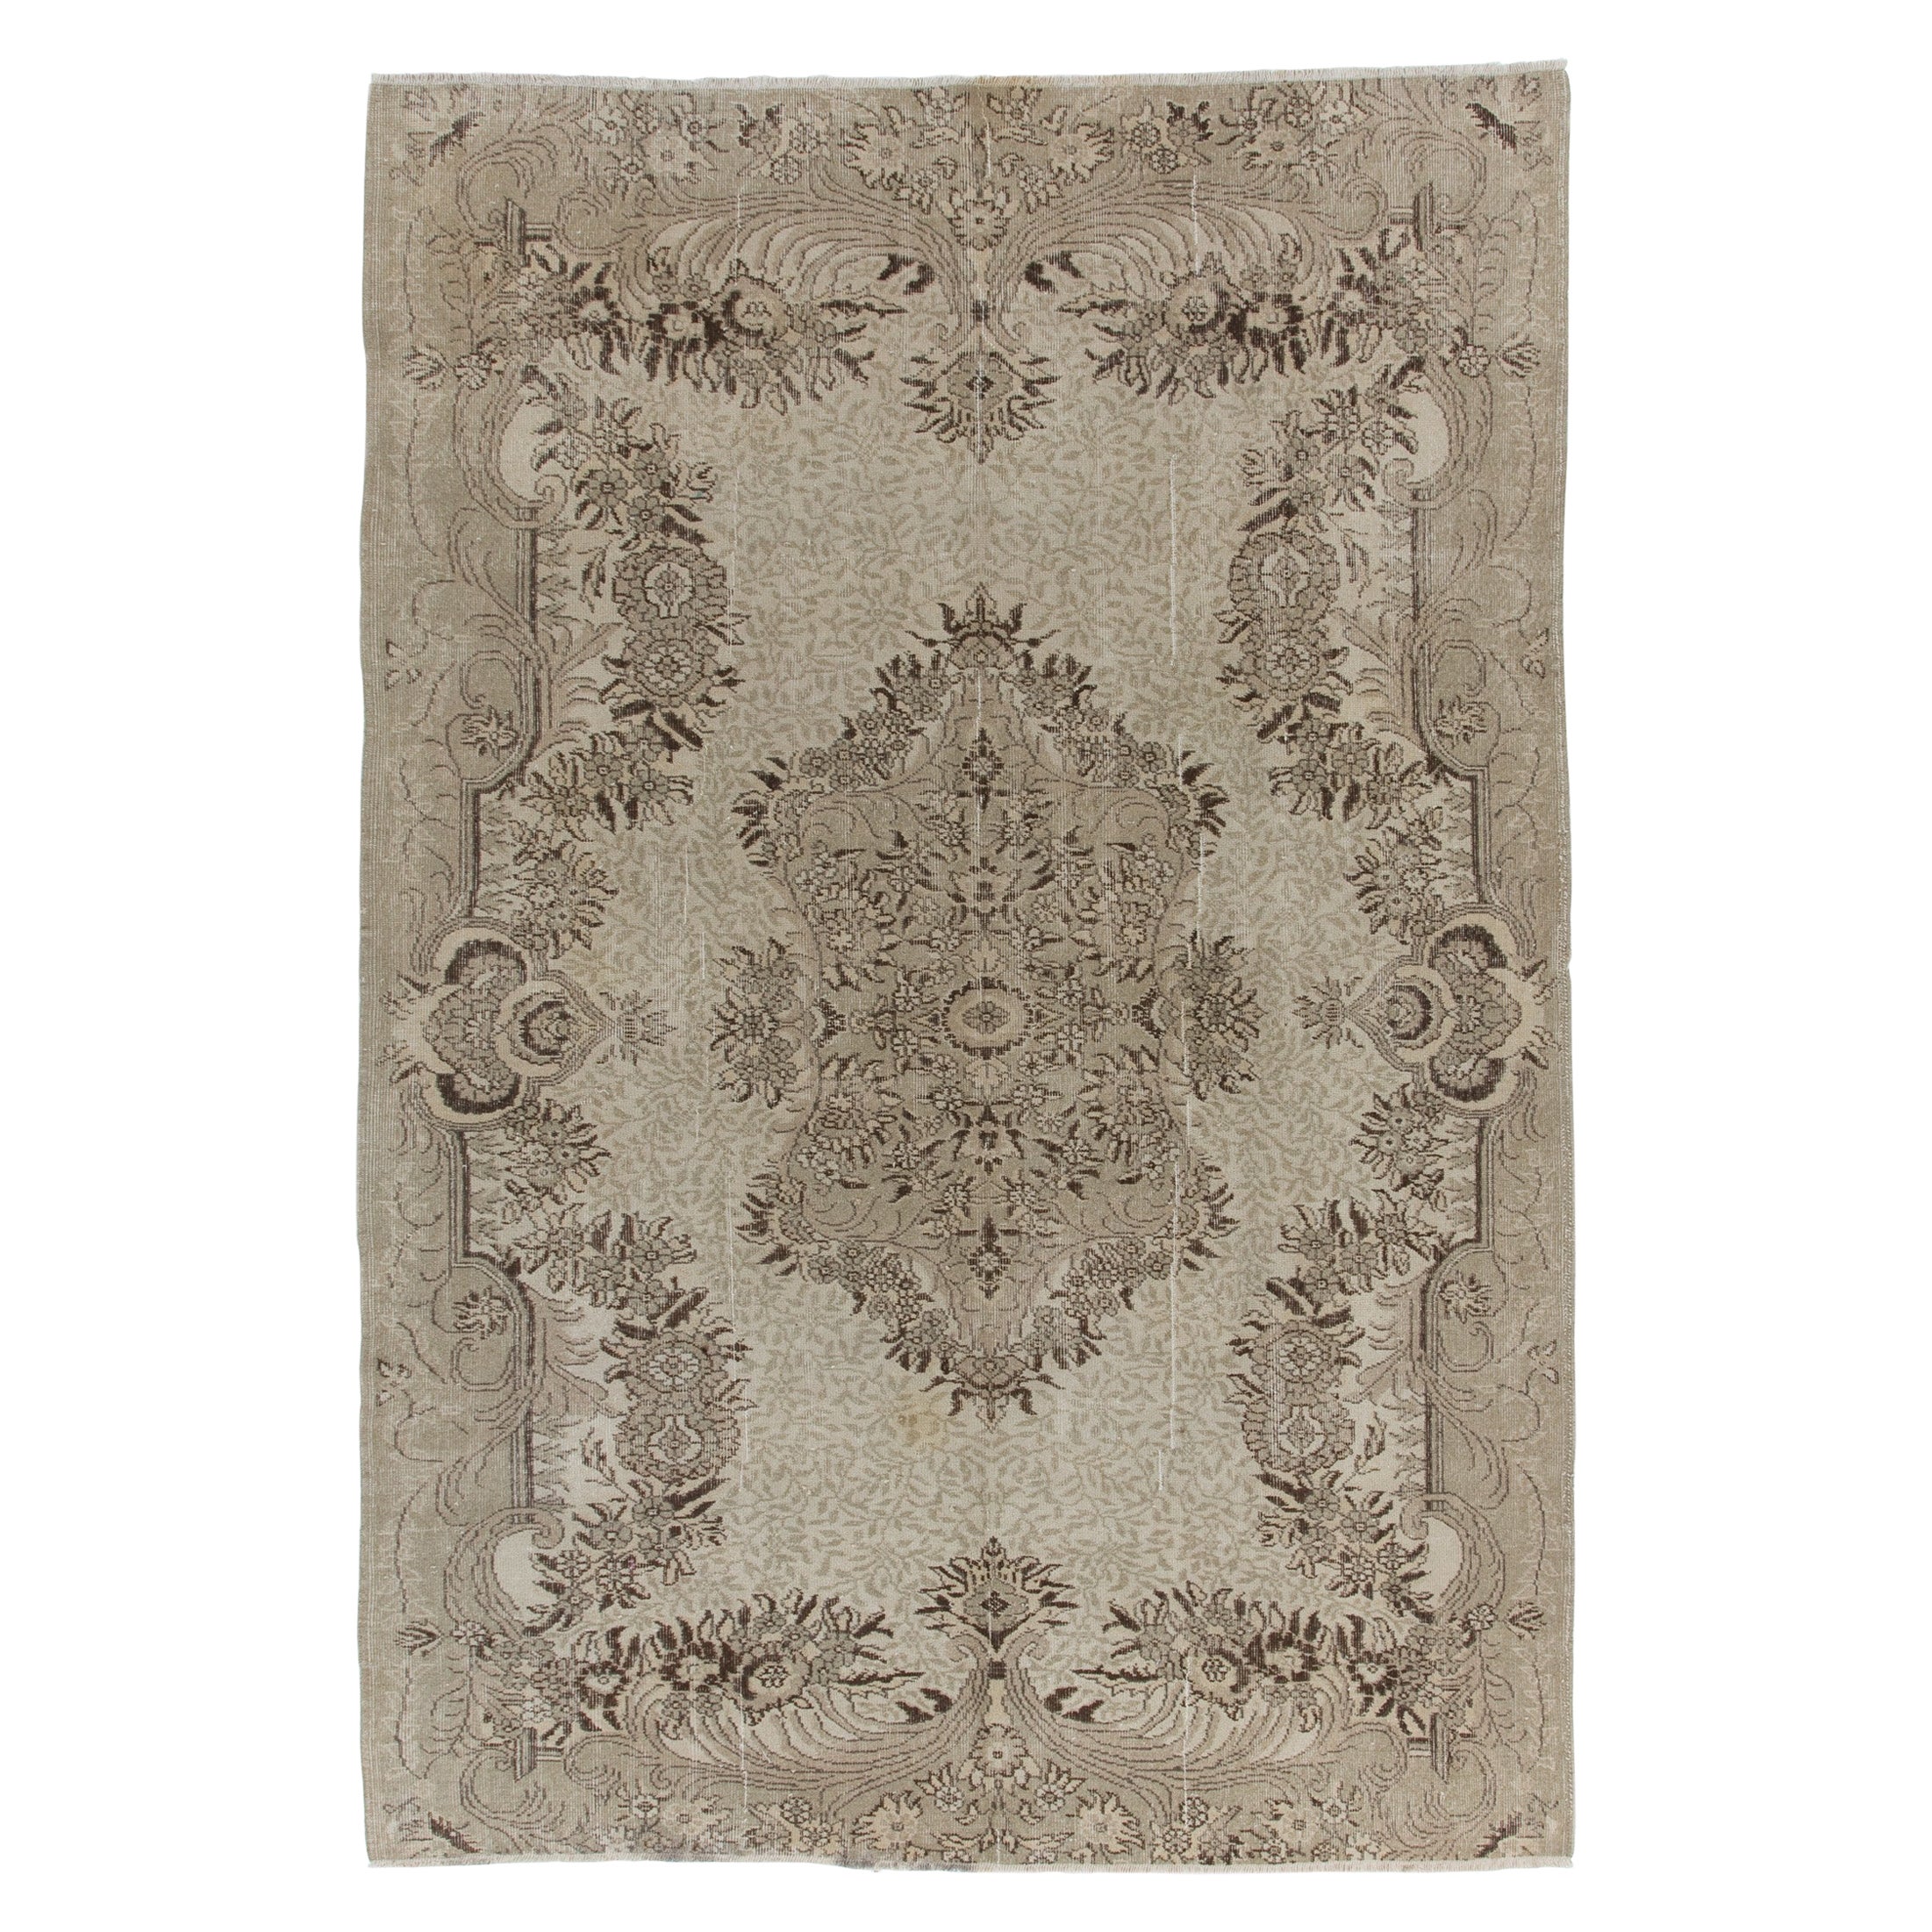 6.7x10 Ft Hand-Knotted 1950s Turkish Oushak Area Rug in Beige, Sun Faded Carpet For Sale